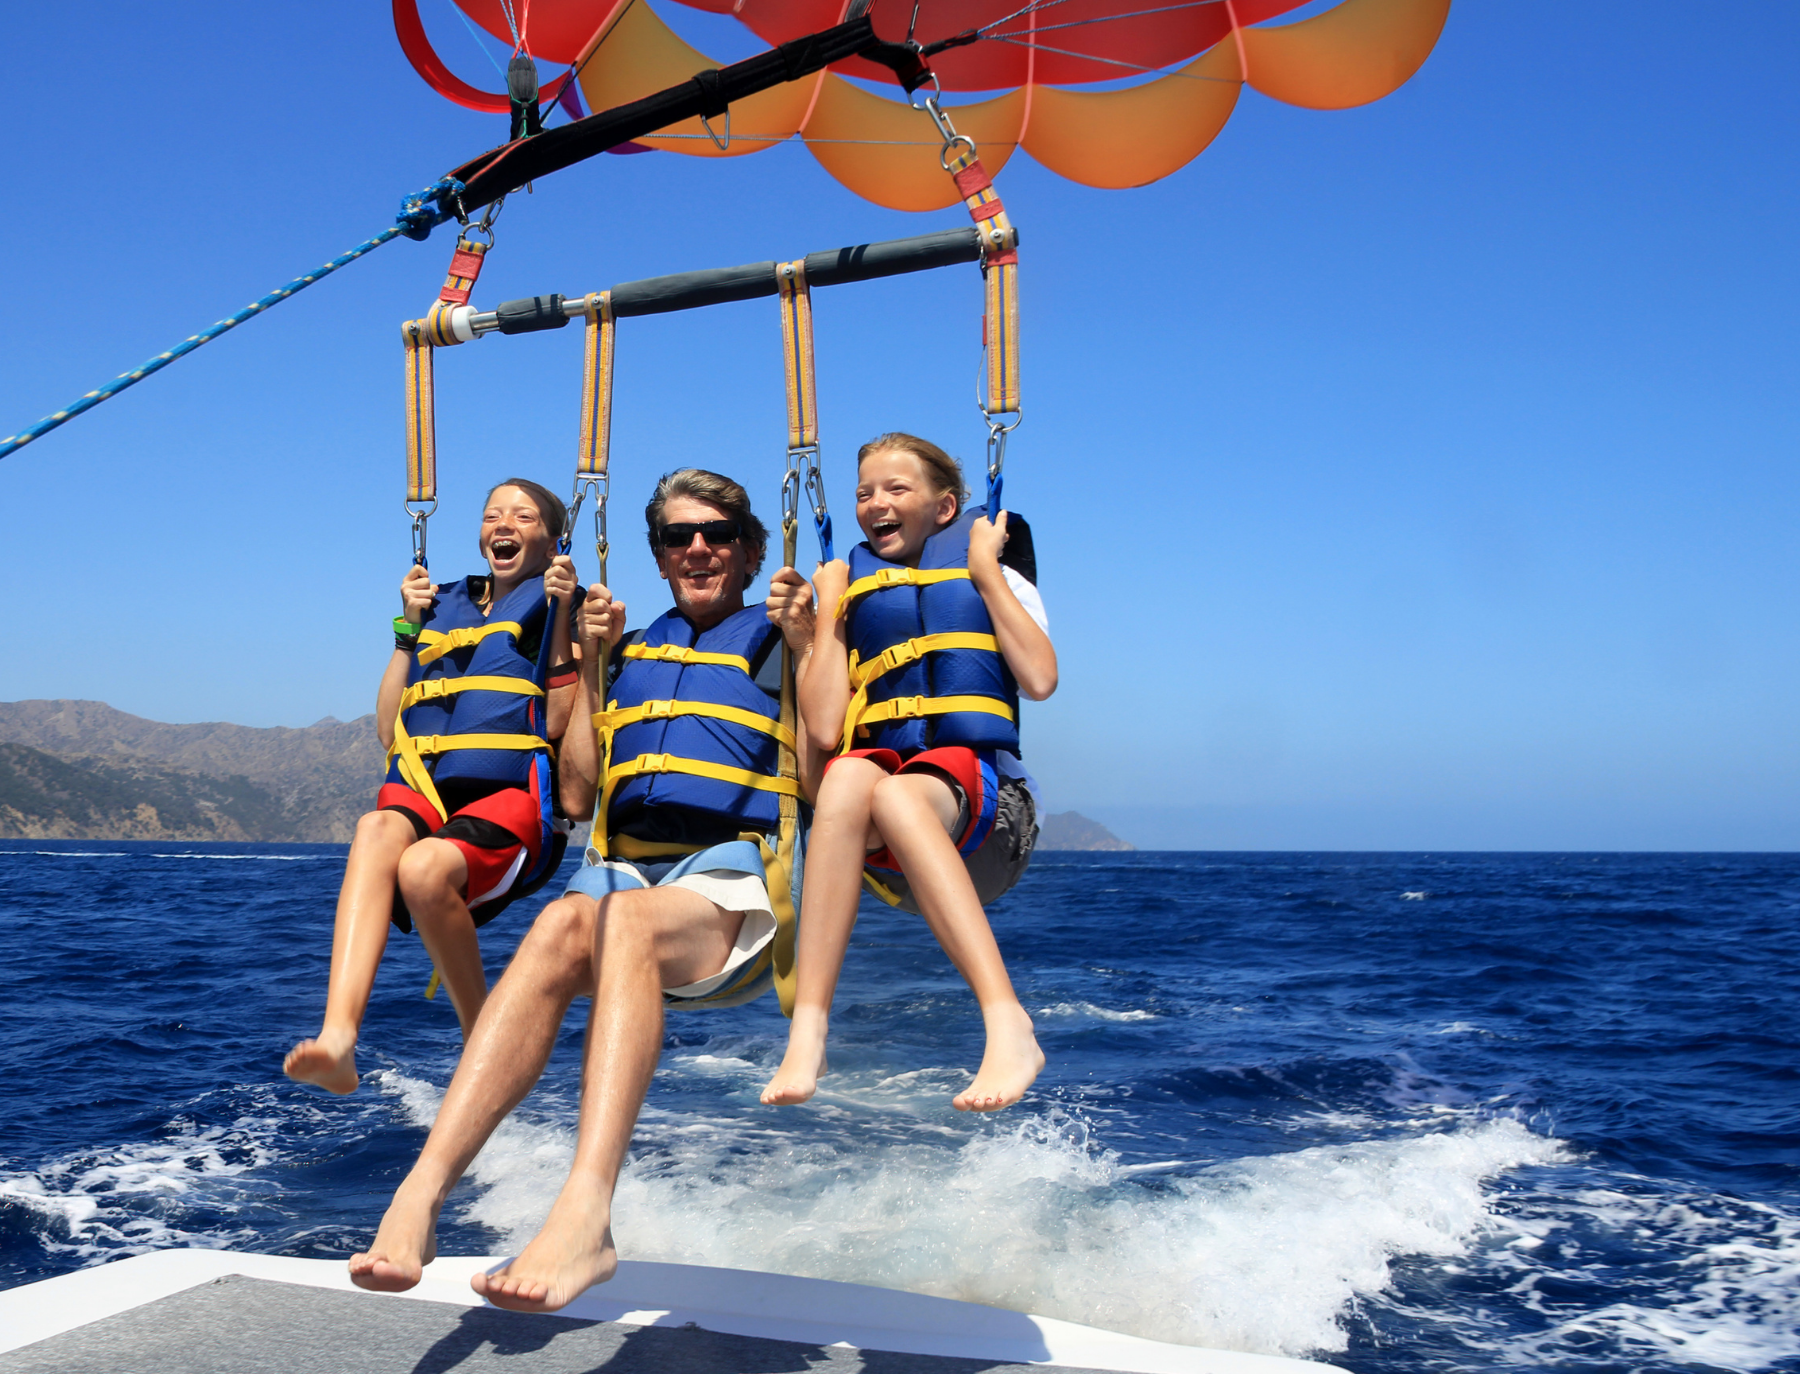 Two girls and one man on parasailing